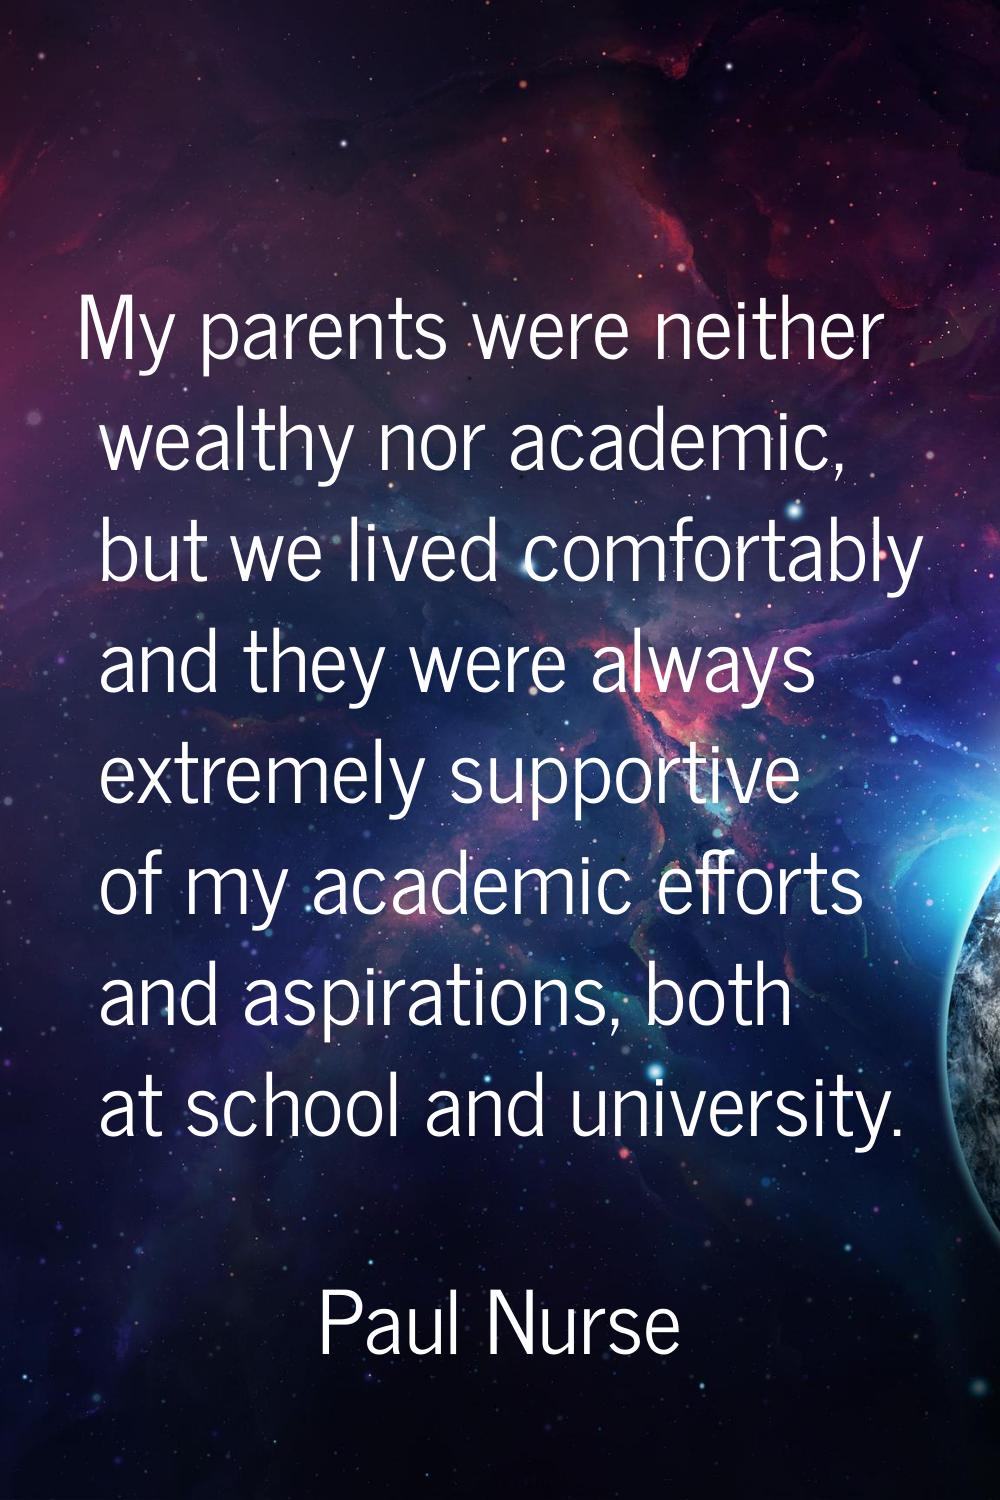 My parents were neither wealthy nor academic, but we lived comfortably and they were always extreme